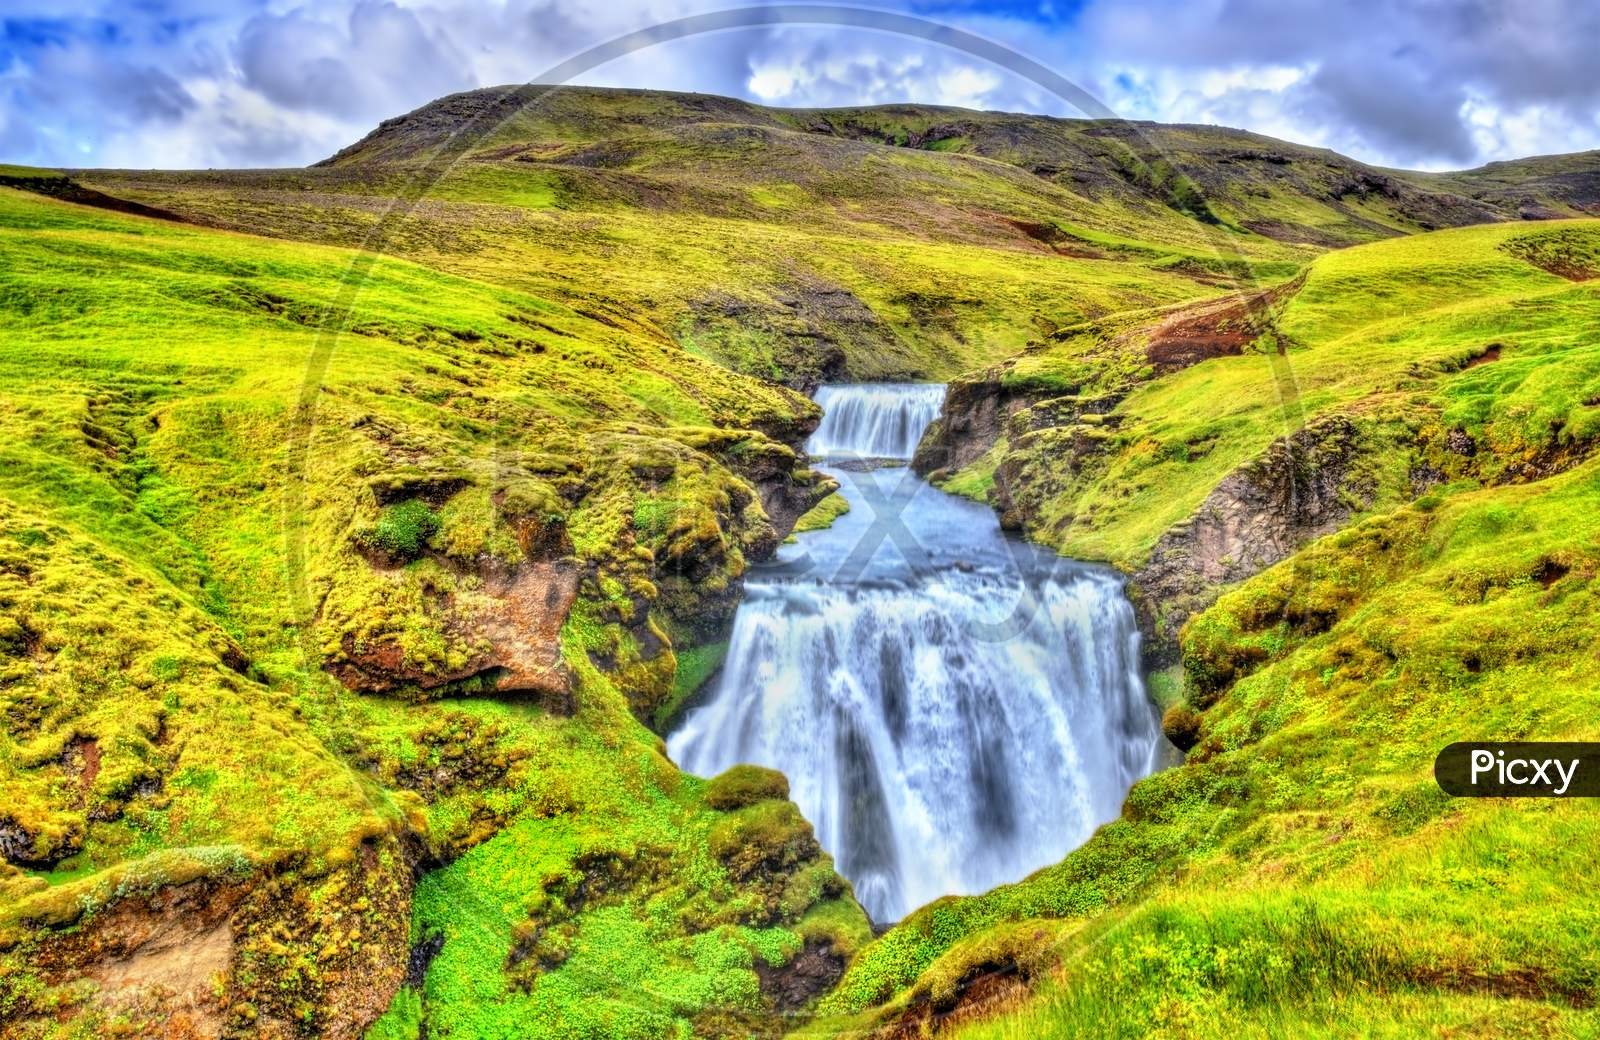 One Of Numerous Waterfalls On The Skoga River - Iceland